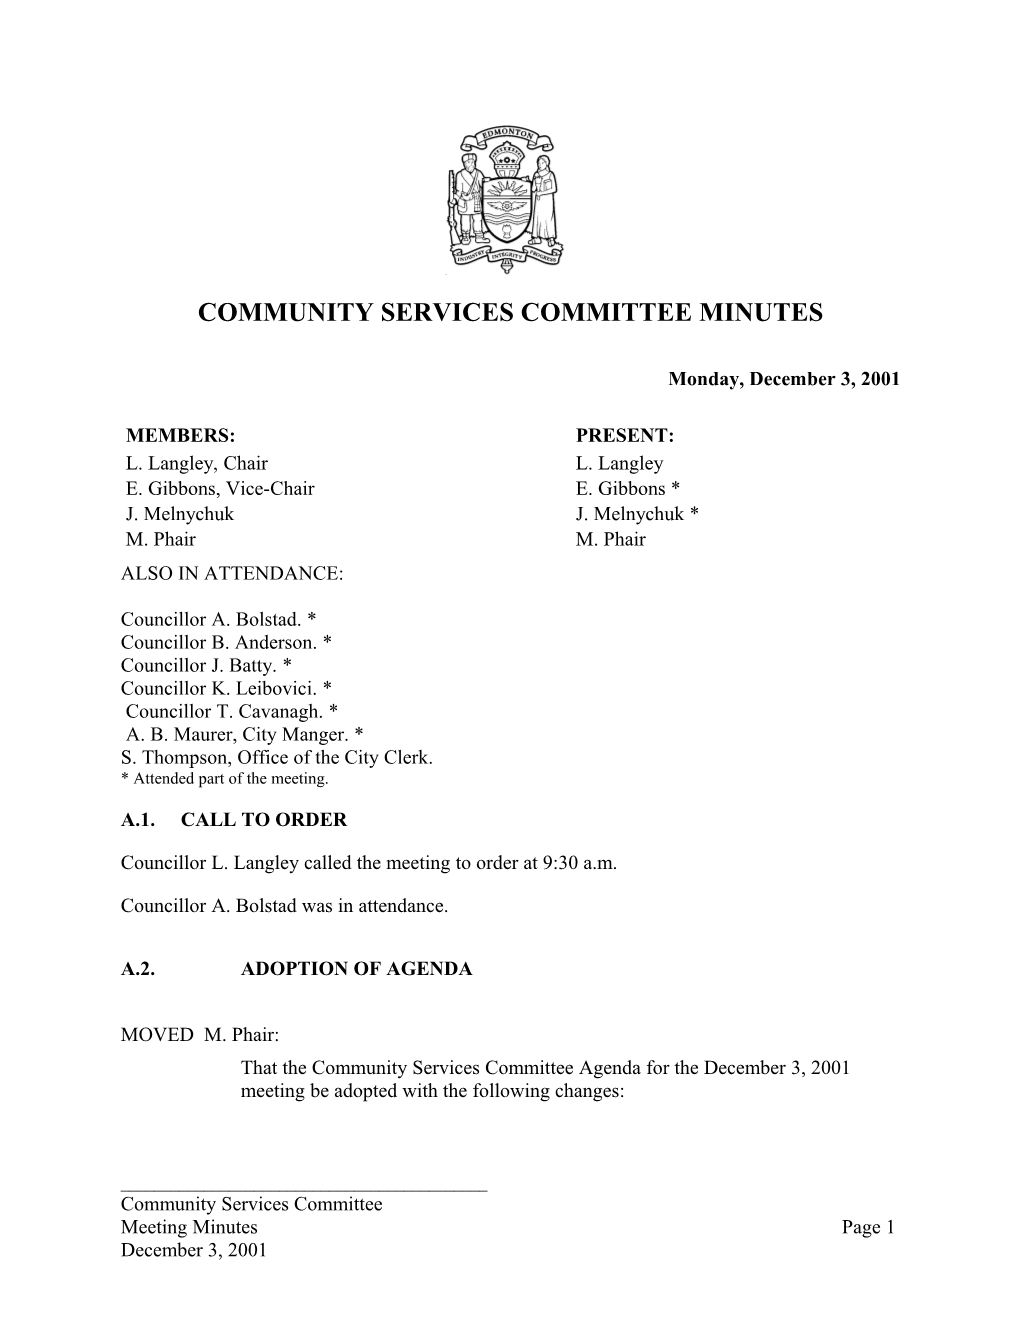 Minutes for Community Services Committee December 3, 2001 Meeting